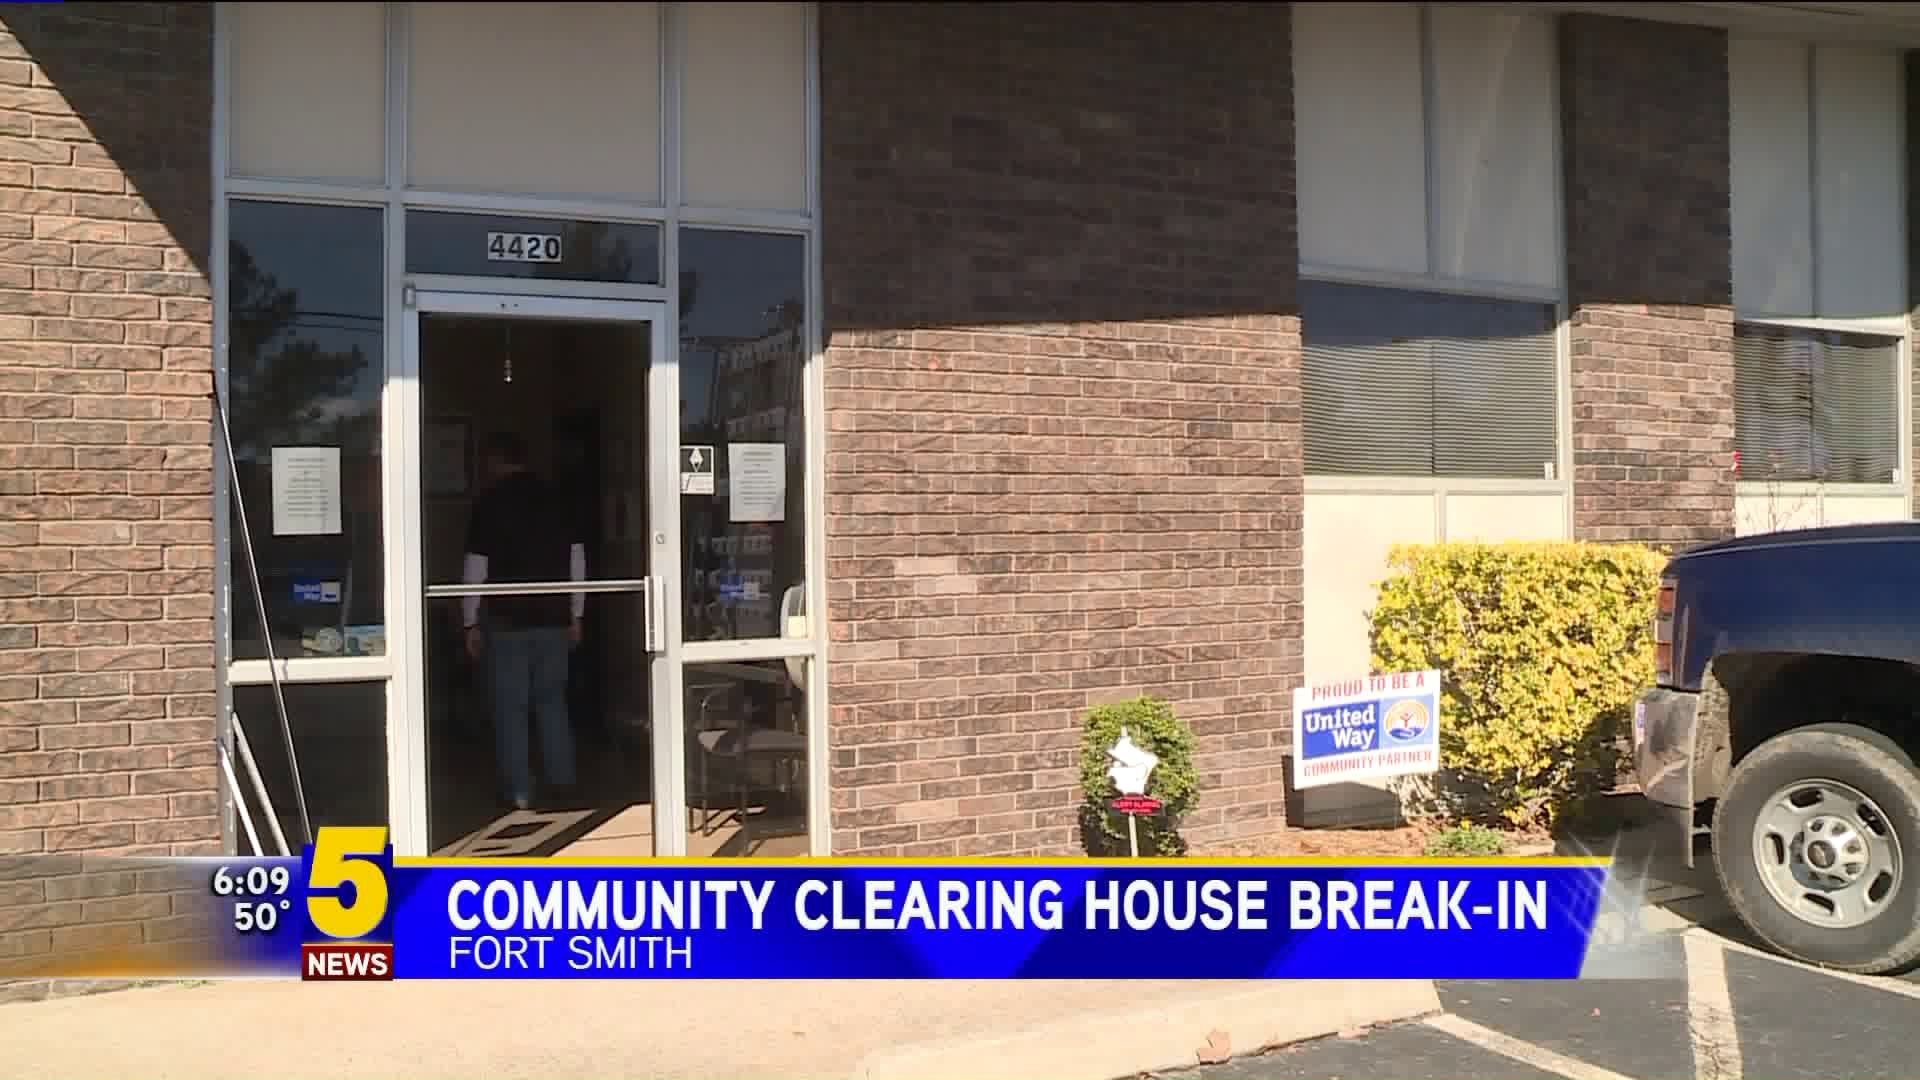 Fort Smith Community Clearning House Break In